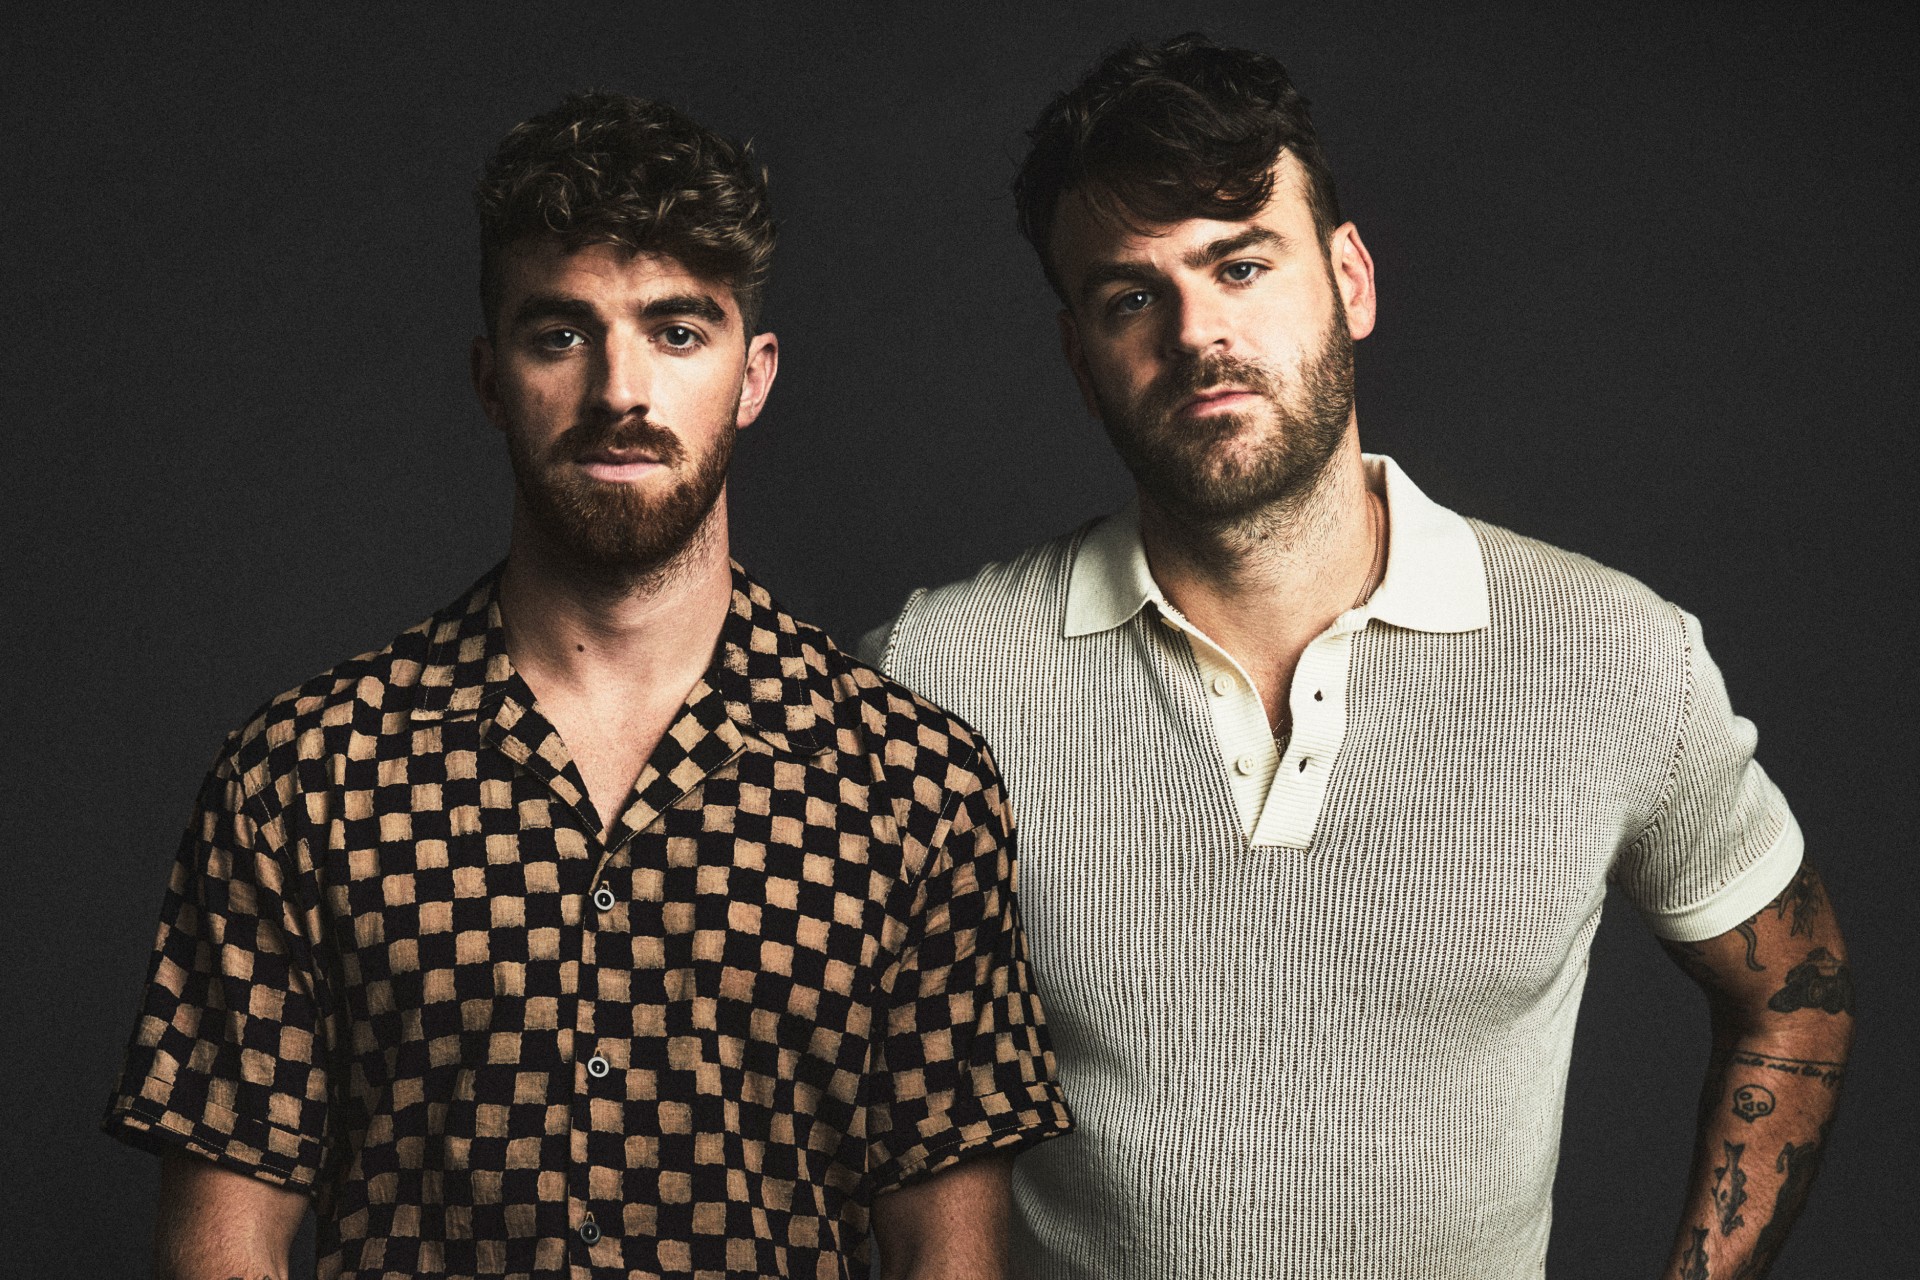 Q&A with The Chainsmokers